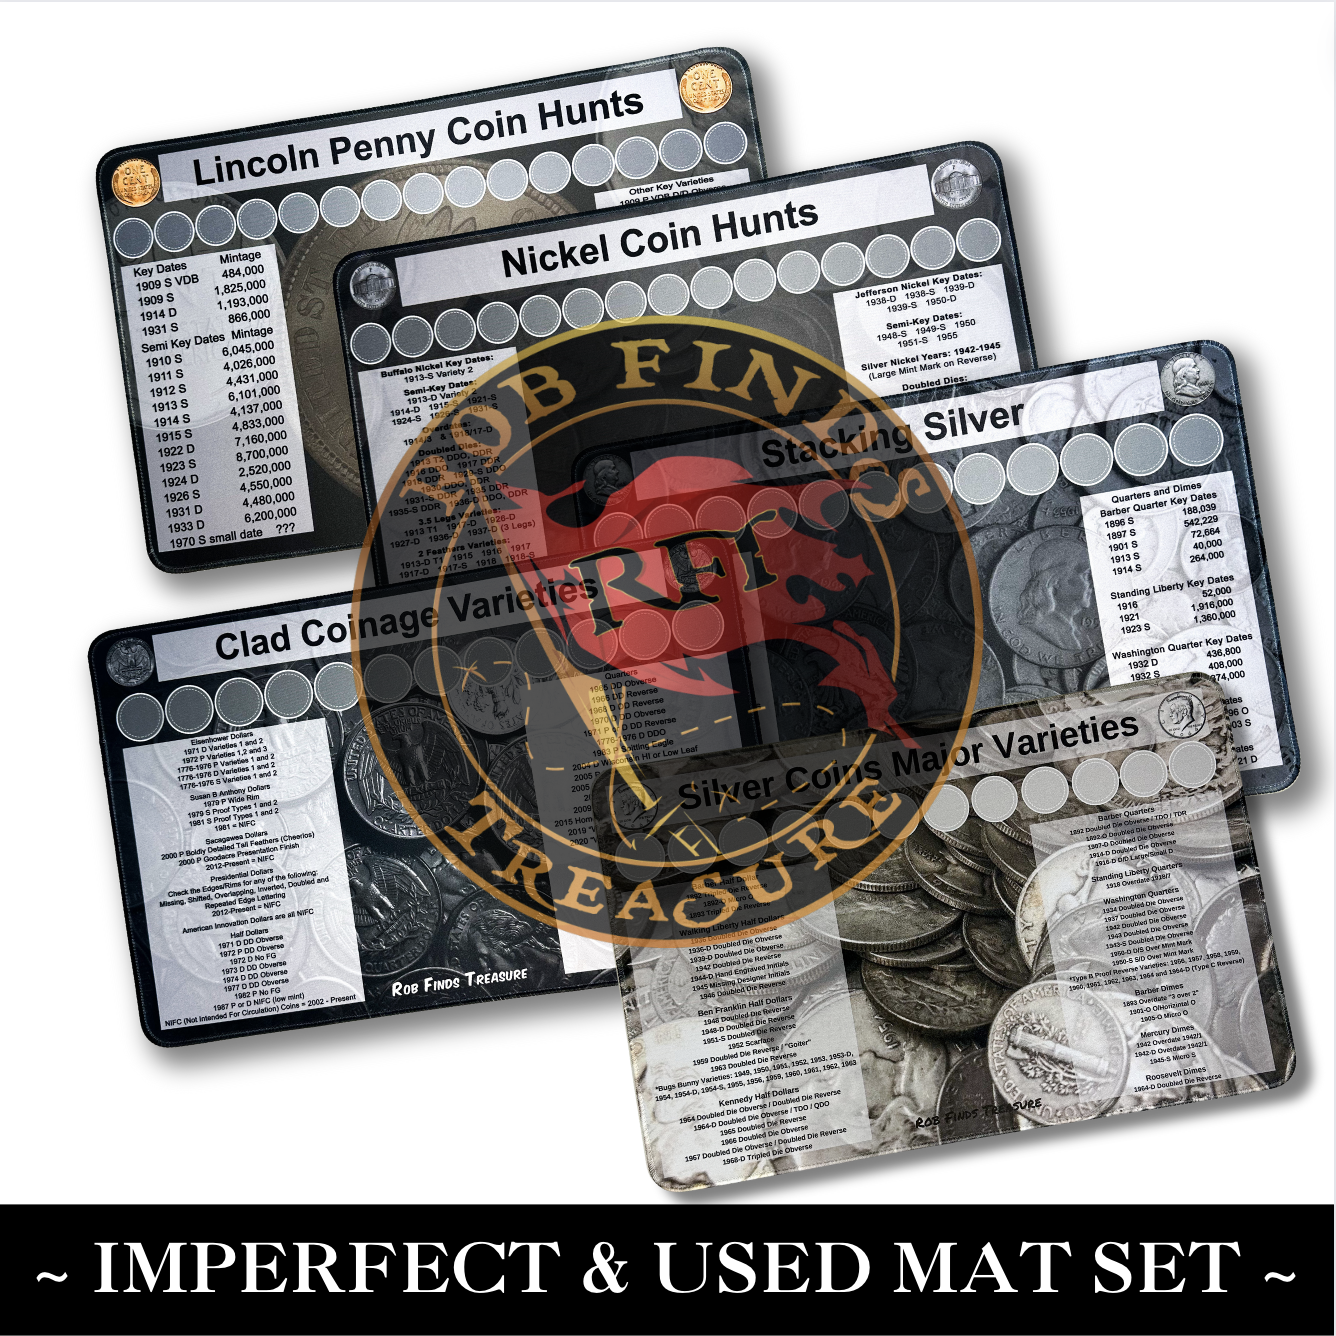 "IMPERFECT & USED" MAT SET